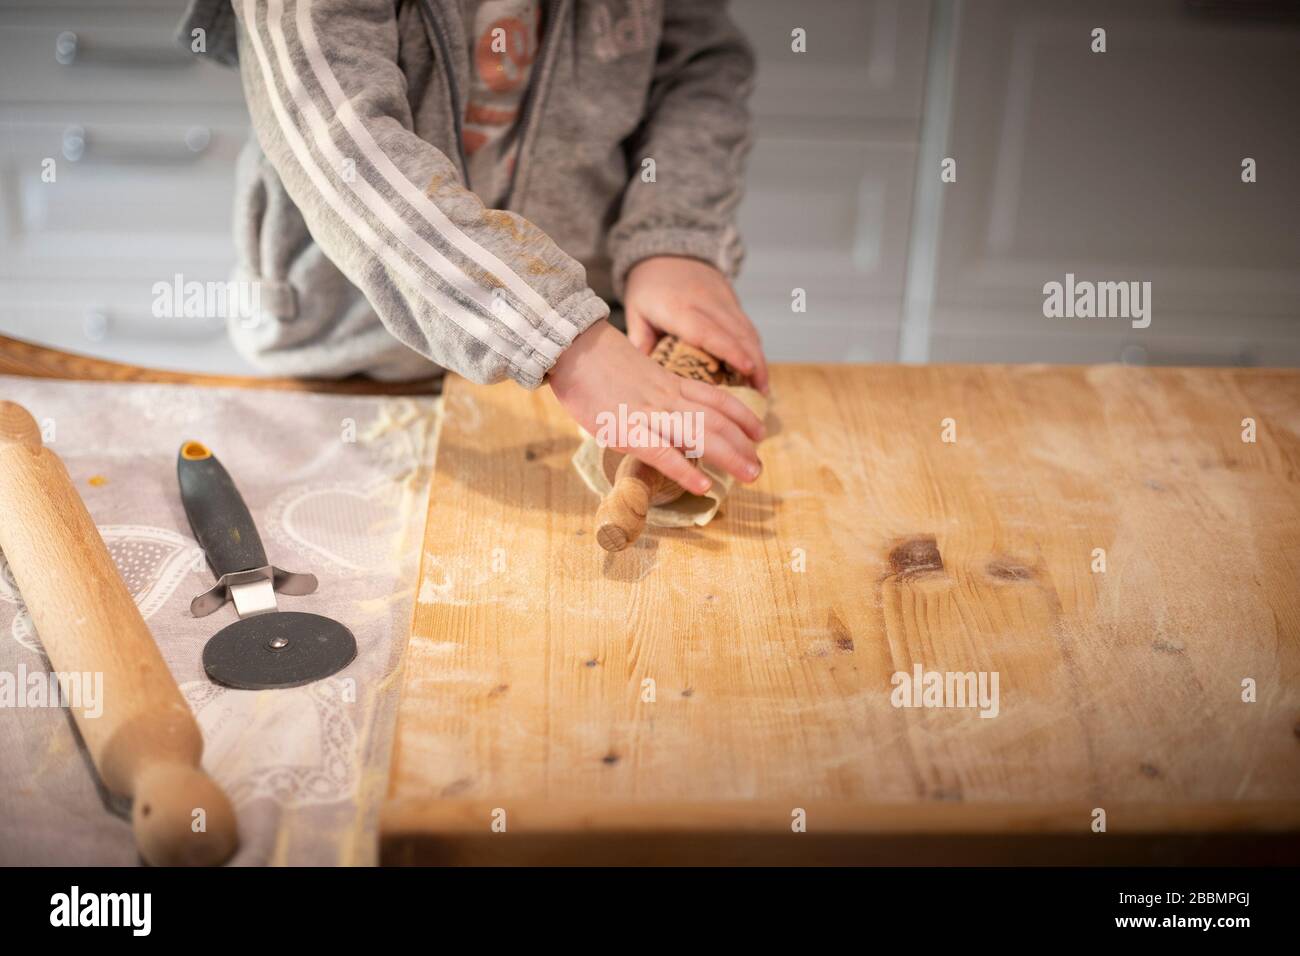 Child girl hands, in white kitchen, flattening pizza dough with a rolling pin on a wooden board. Detail. Lockdown activity idea. Stock Photo